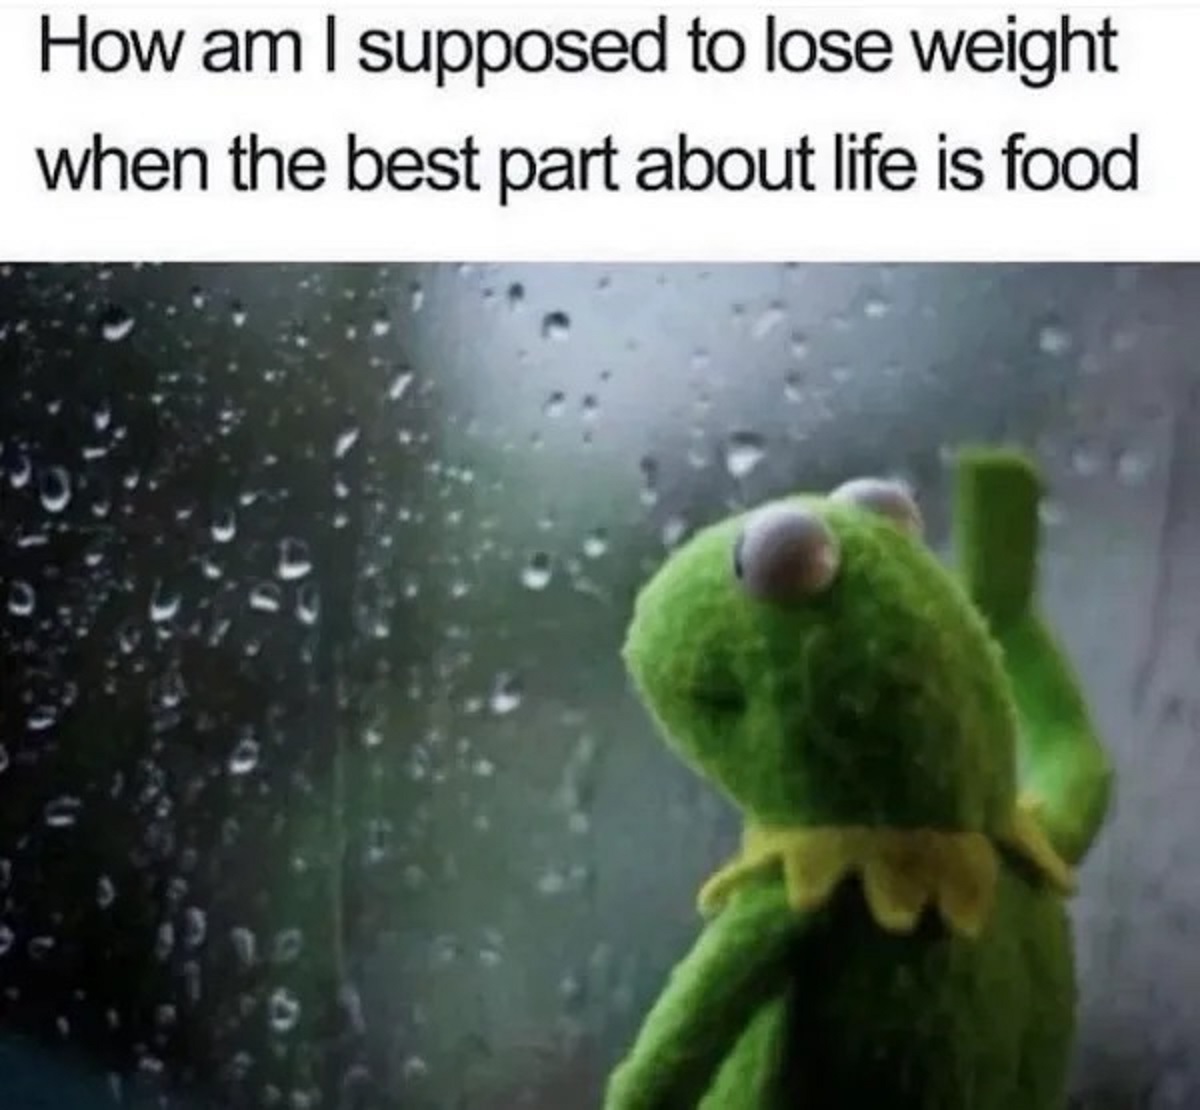 kermit rain meme - How am I supposed to lose weight when the best part about life is food